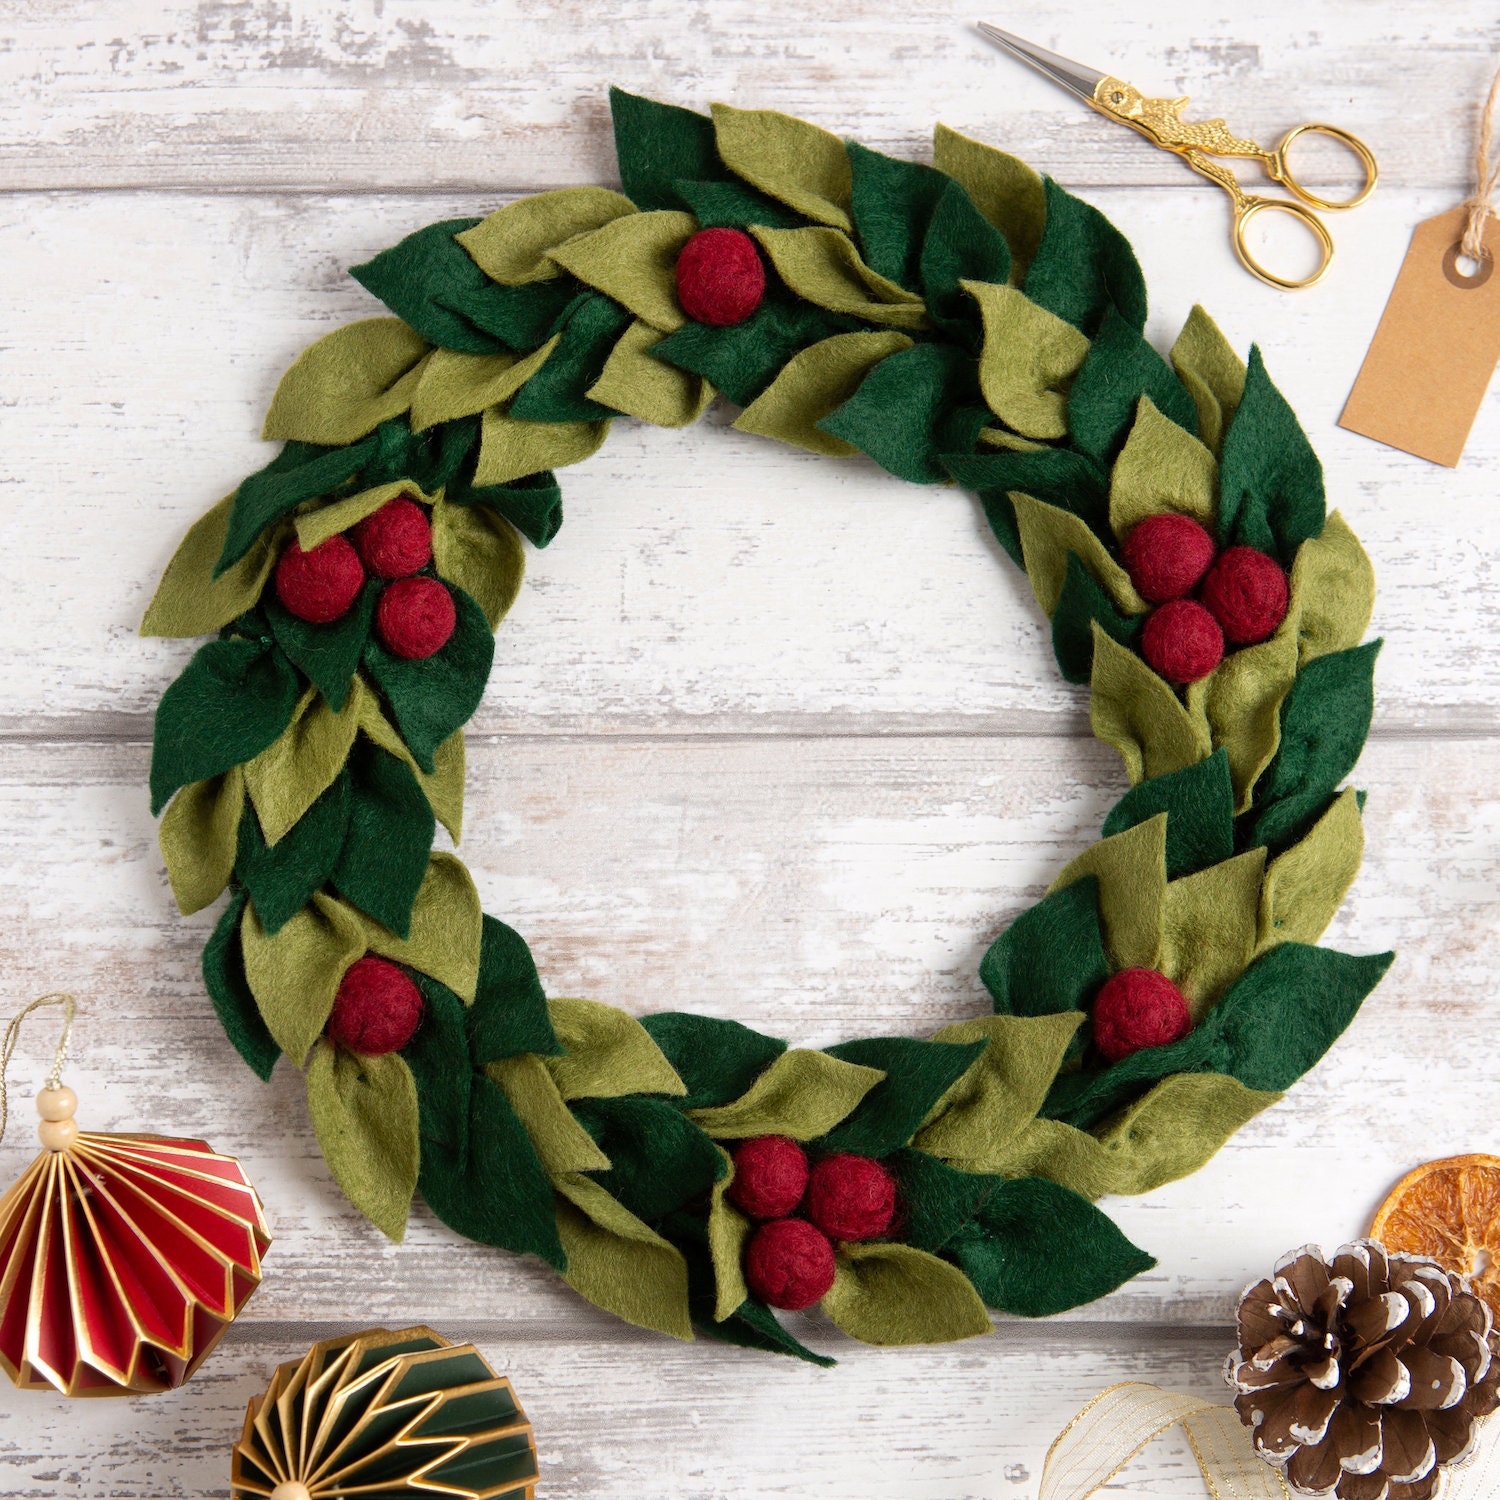 Make One 6 Inch Mini Quillie Wreath Kit! Makes a Great Holiday Ornament or  Wall Hanging for Your Seasonal Decor! — loop by loop studio